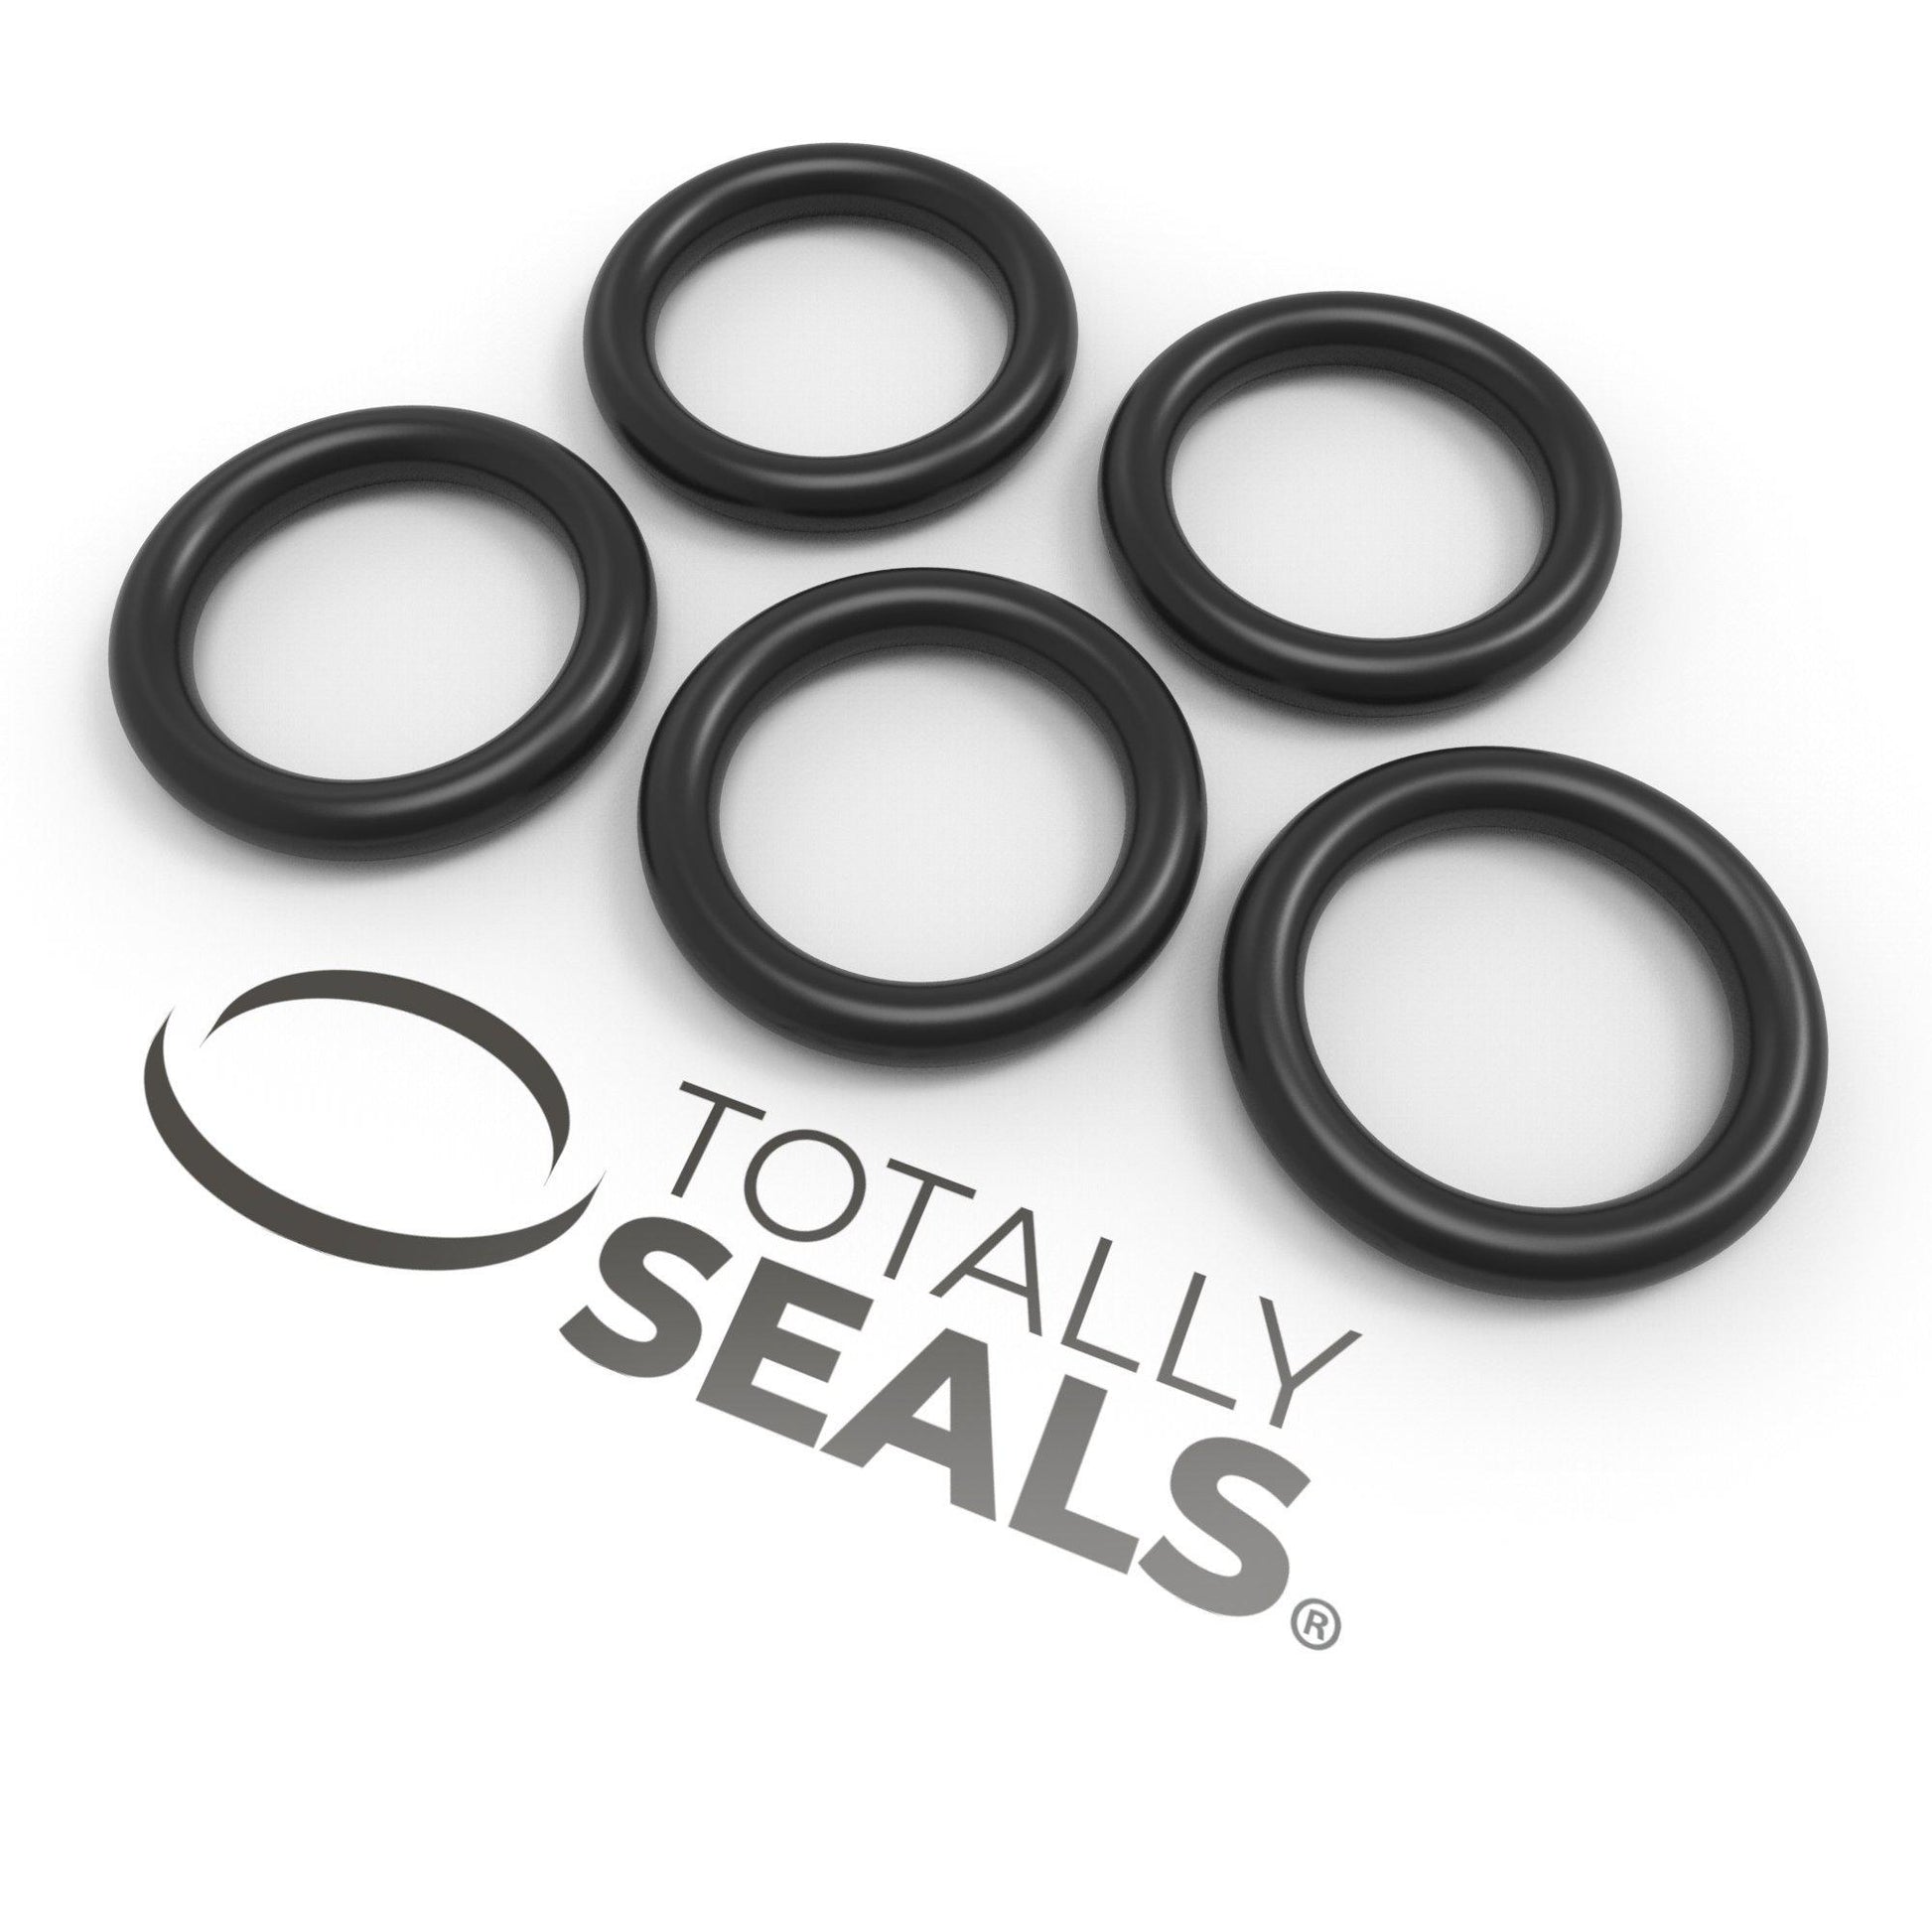 35mm x 1.5mm (38mm OD) Nitrile O-Rings - Totally Seals®